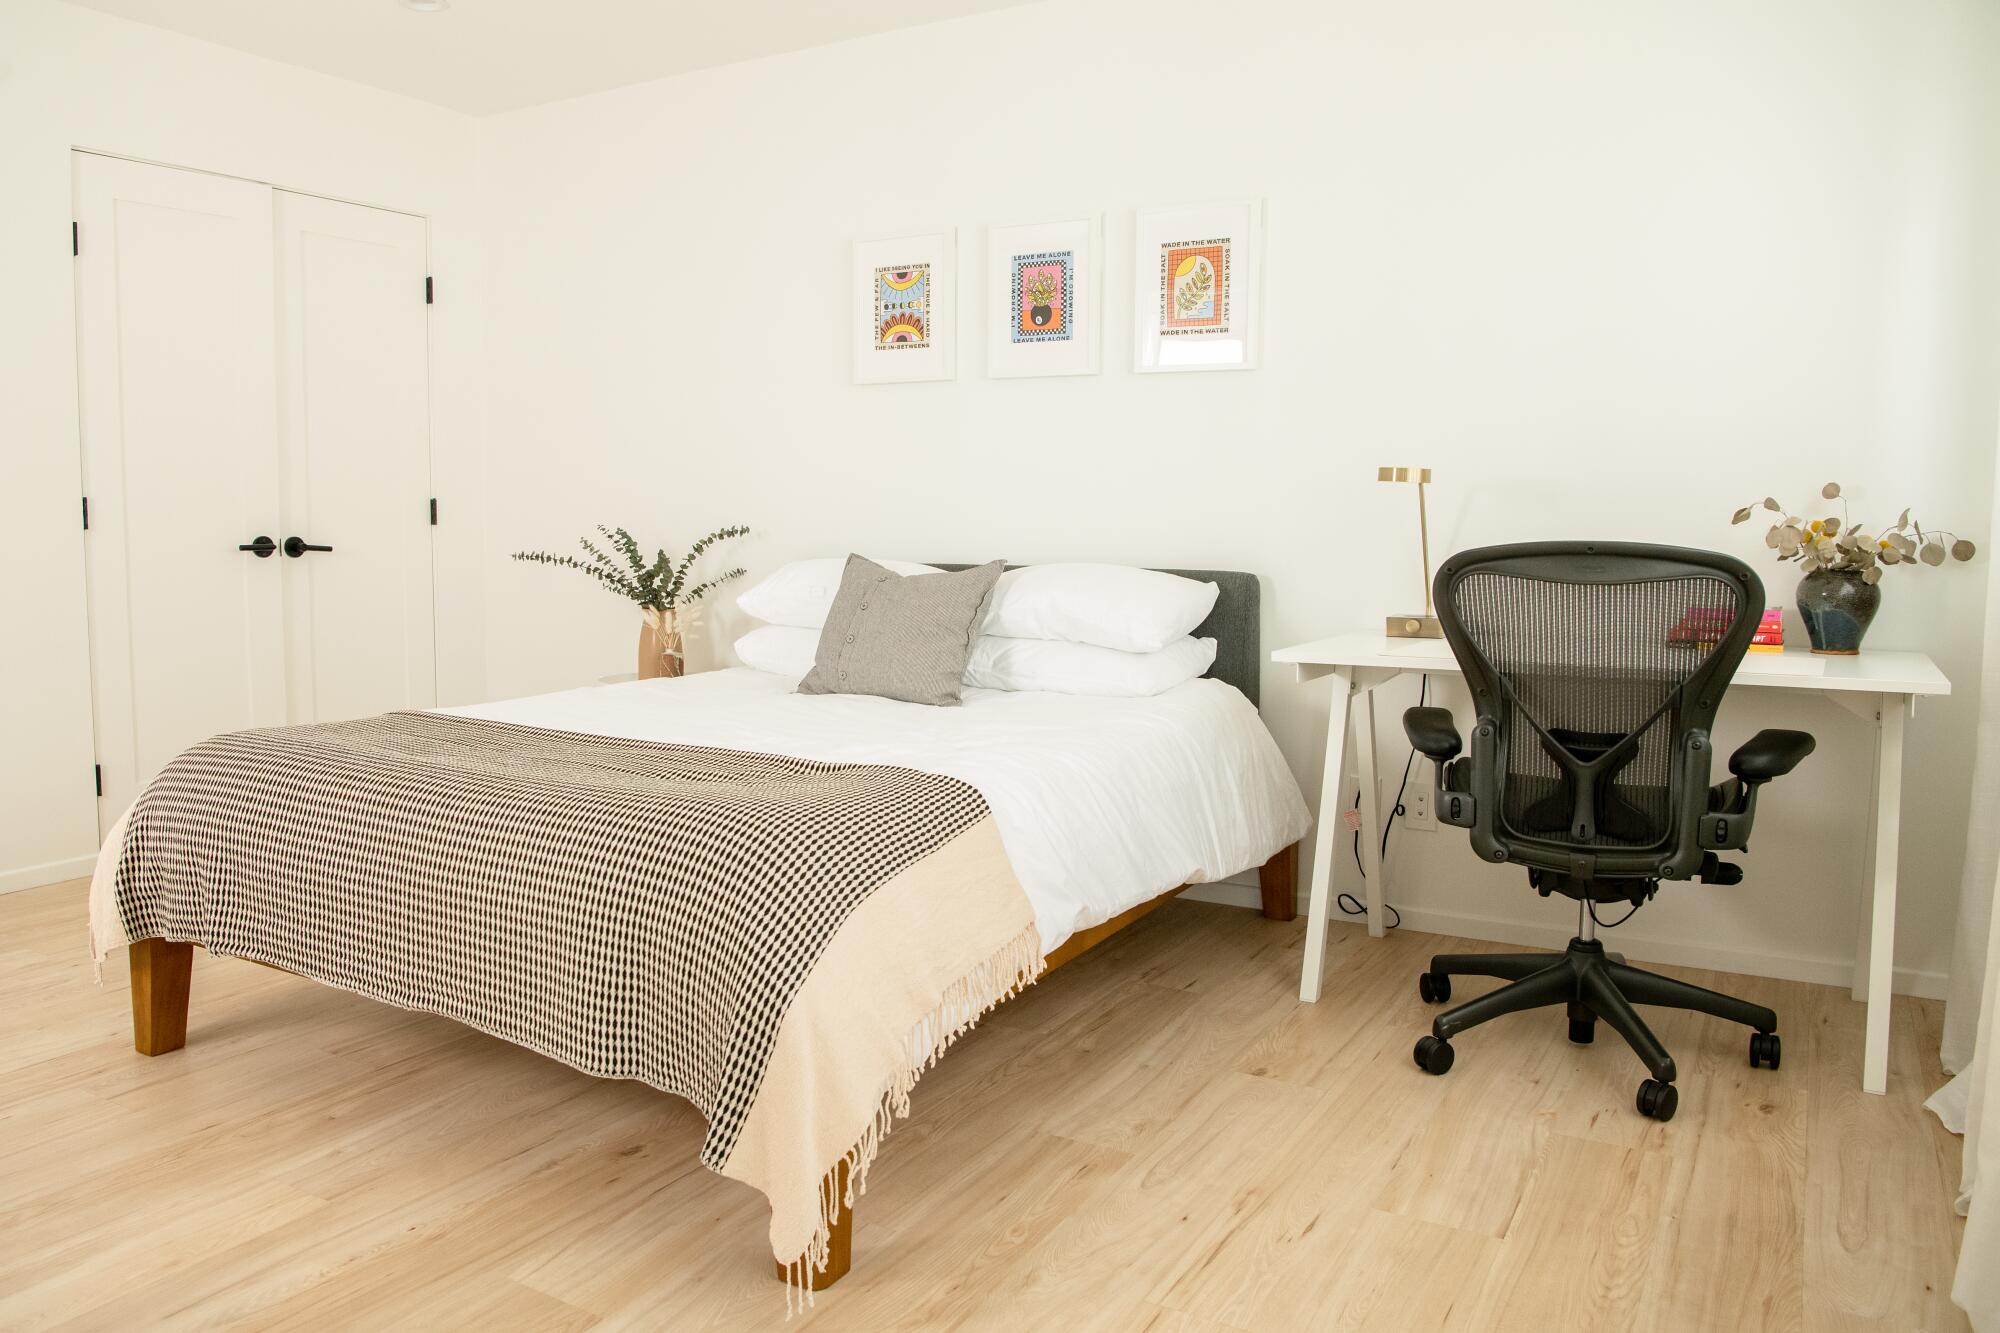 A queen bed sits between side-by-side closets and a desk in the ADU's bedroom.